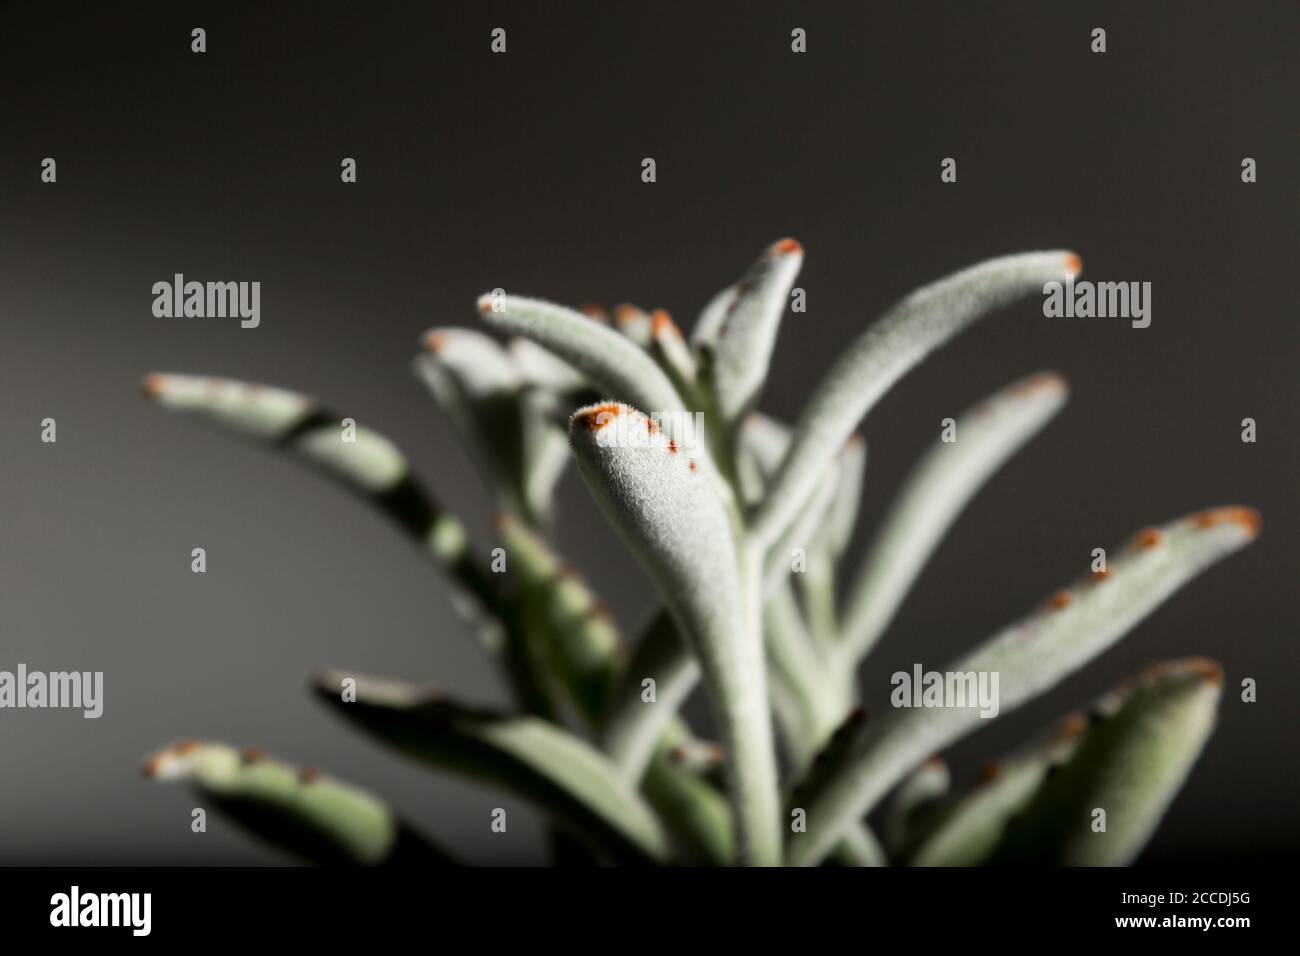 Close up of a Succulent: Panda Plant or Kalanchoe tomentosa on a dark grey background. Stock Photo